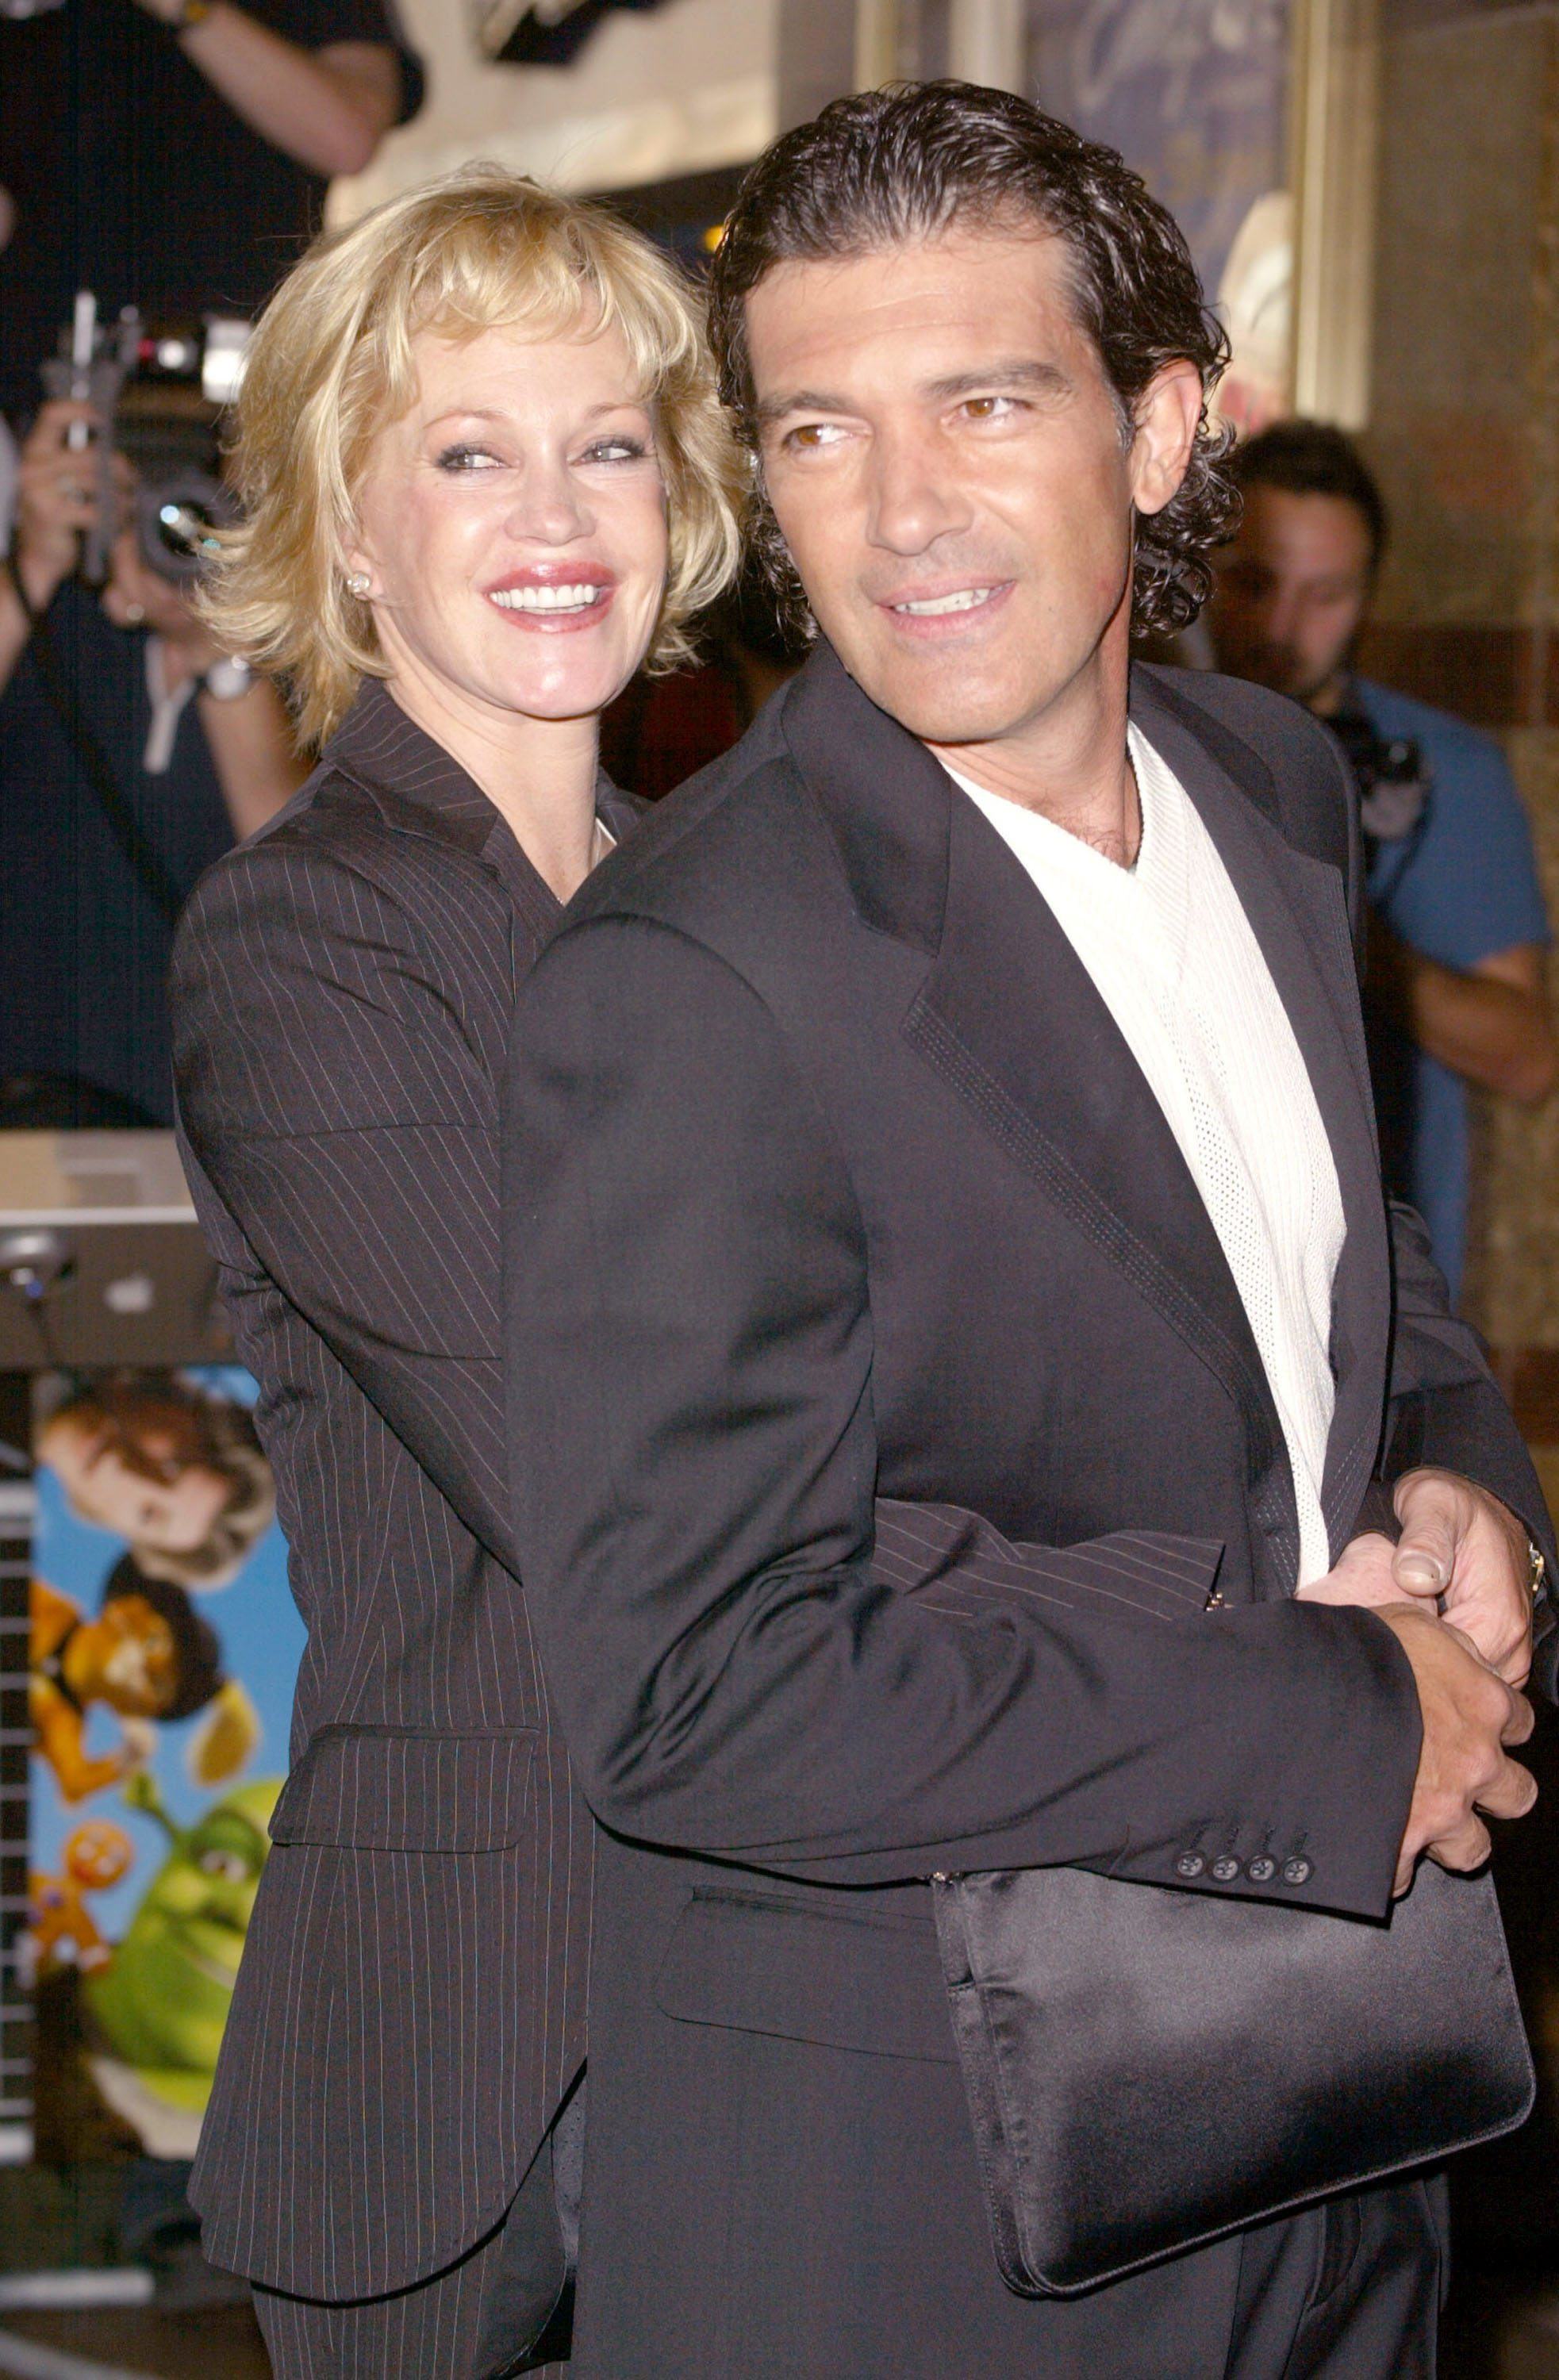 Melanie Griffith and Antonio Banderas at the charity premiere of "Shrek 2" in London in 2004 | Source: Getty Images